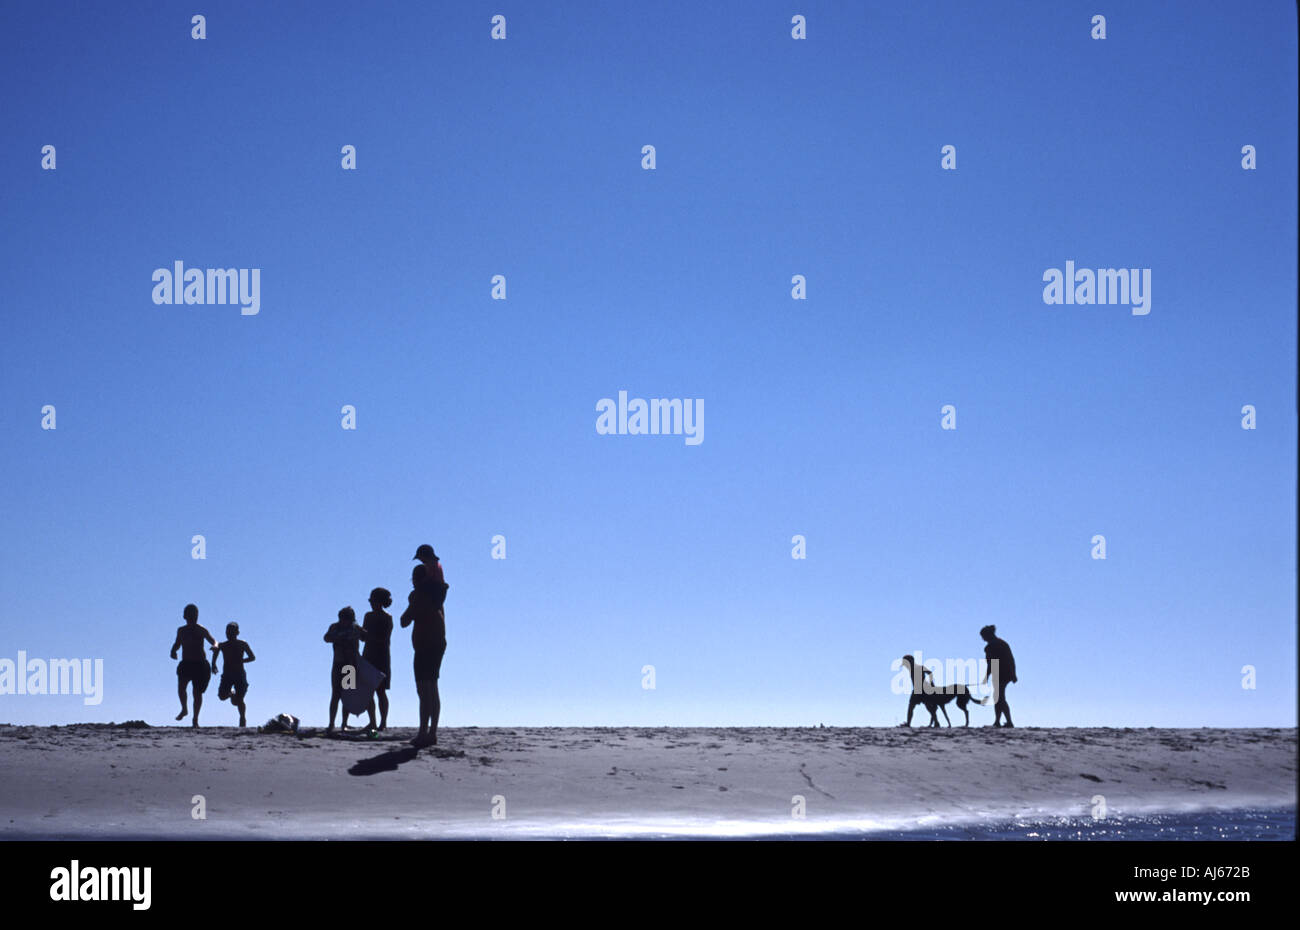 Family Sihouetted on Beach Against a Blue Sky UK Stock Photo